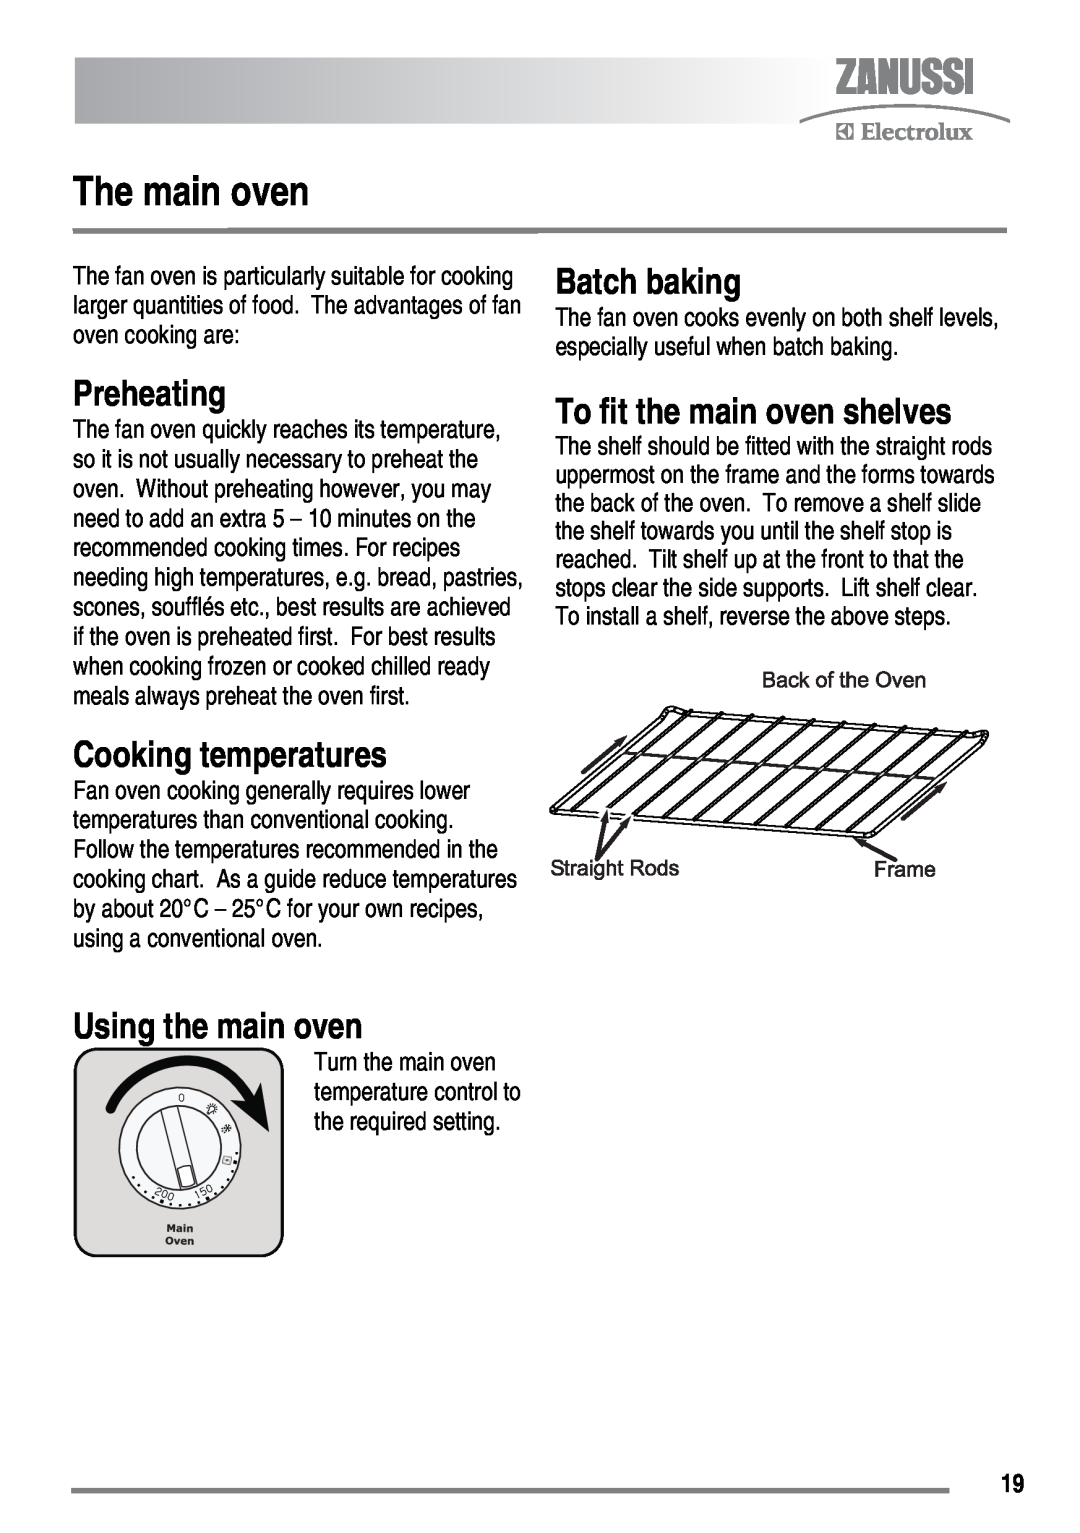 Zanussi ZKC6020 user manual The main oven, Batch baking, Preheating, To fit the main oven shelves, Cooking temperatures 